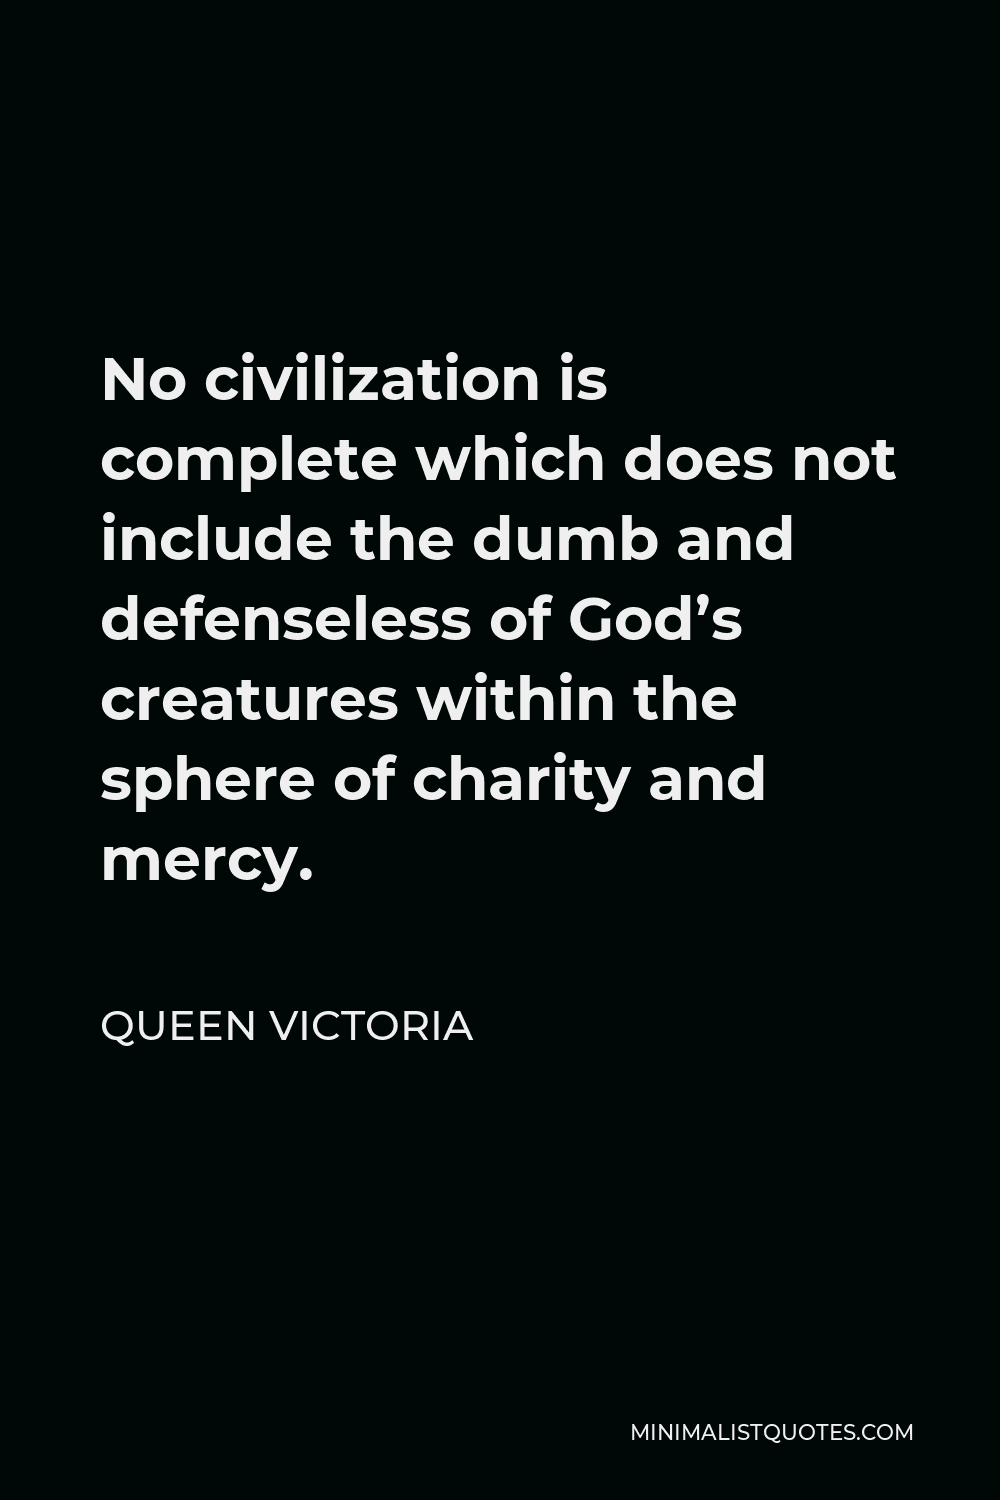 Queen Victoria Quote - No civilization is complete which does not include the dumb and defenseless of God’s creatures within the sphere of charity and mercy.